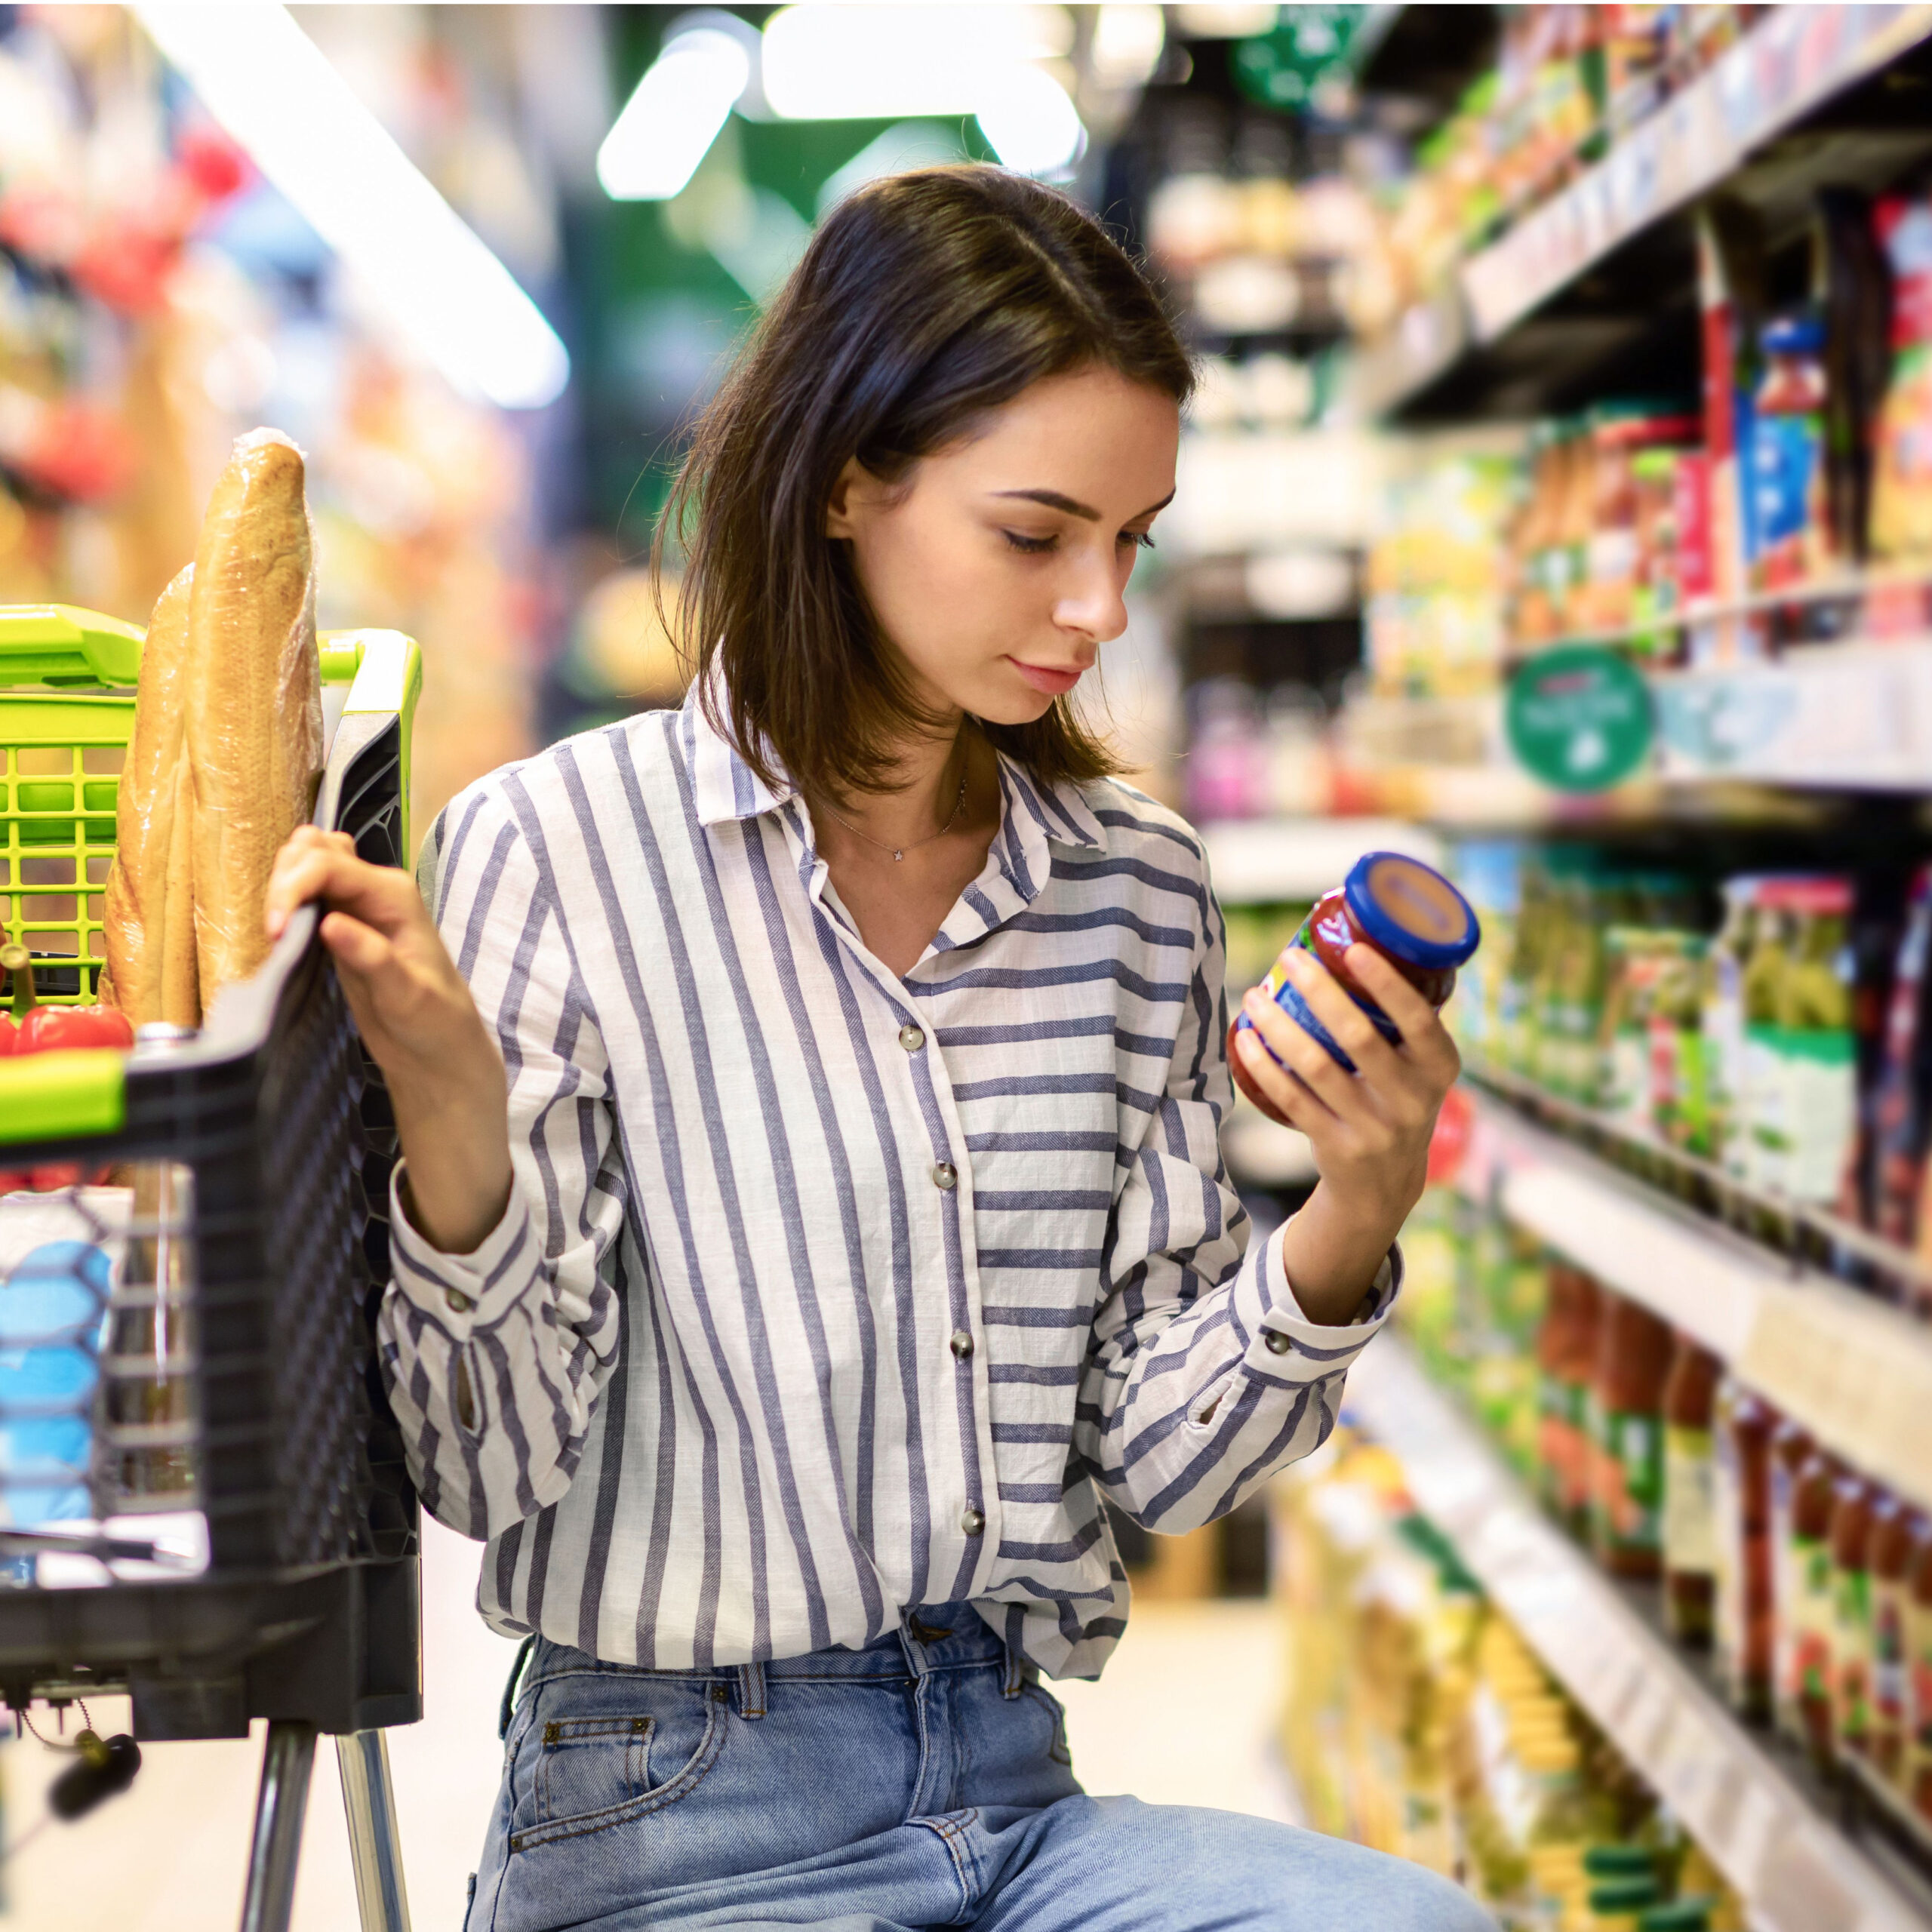 woman checking nutrition label of product in grocery store